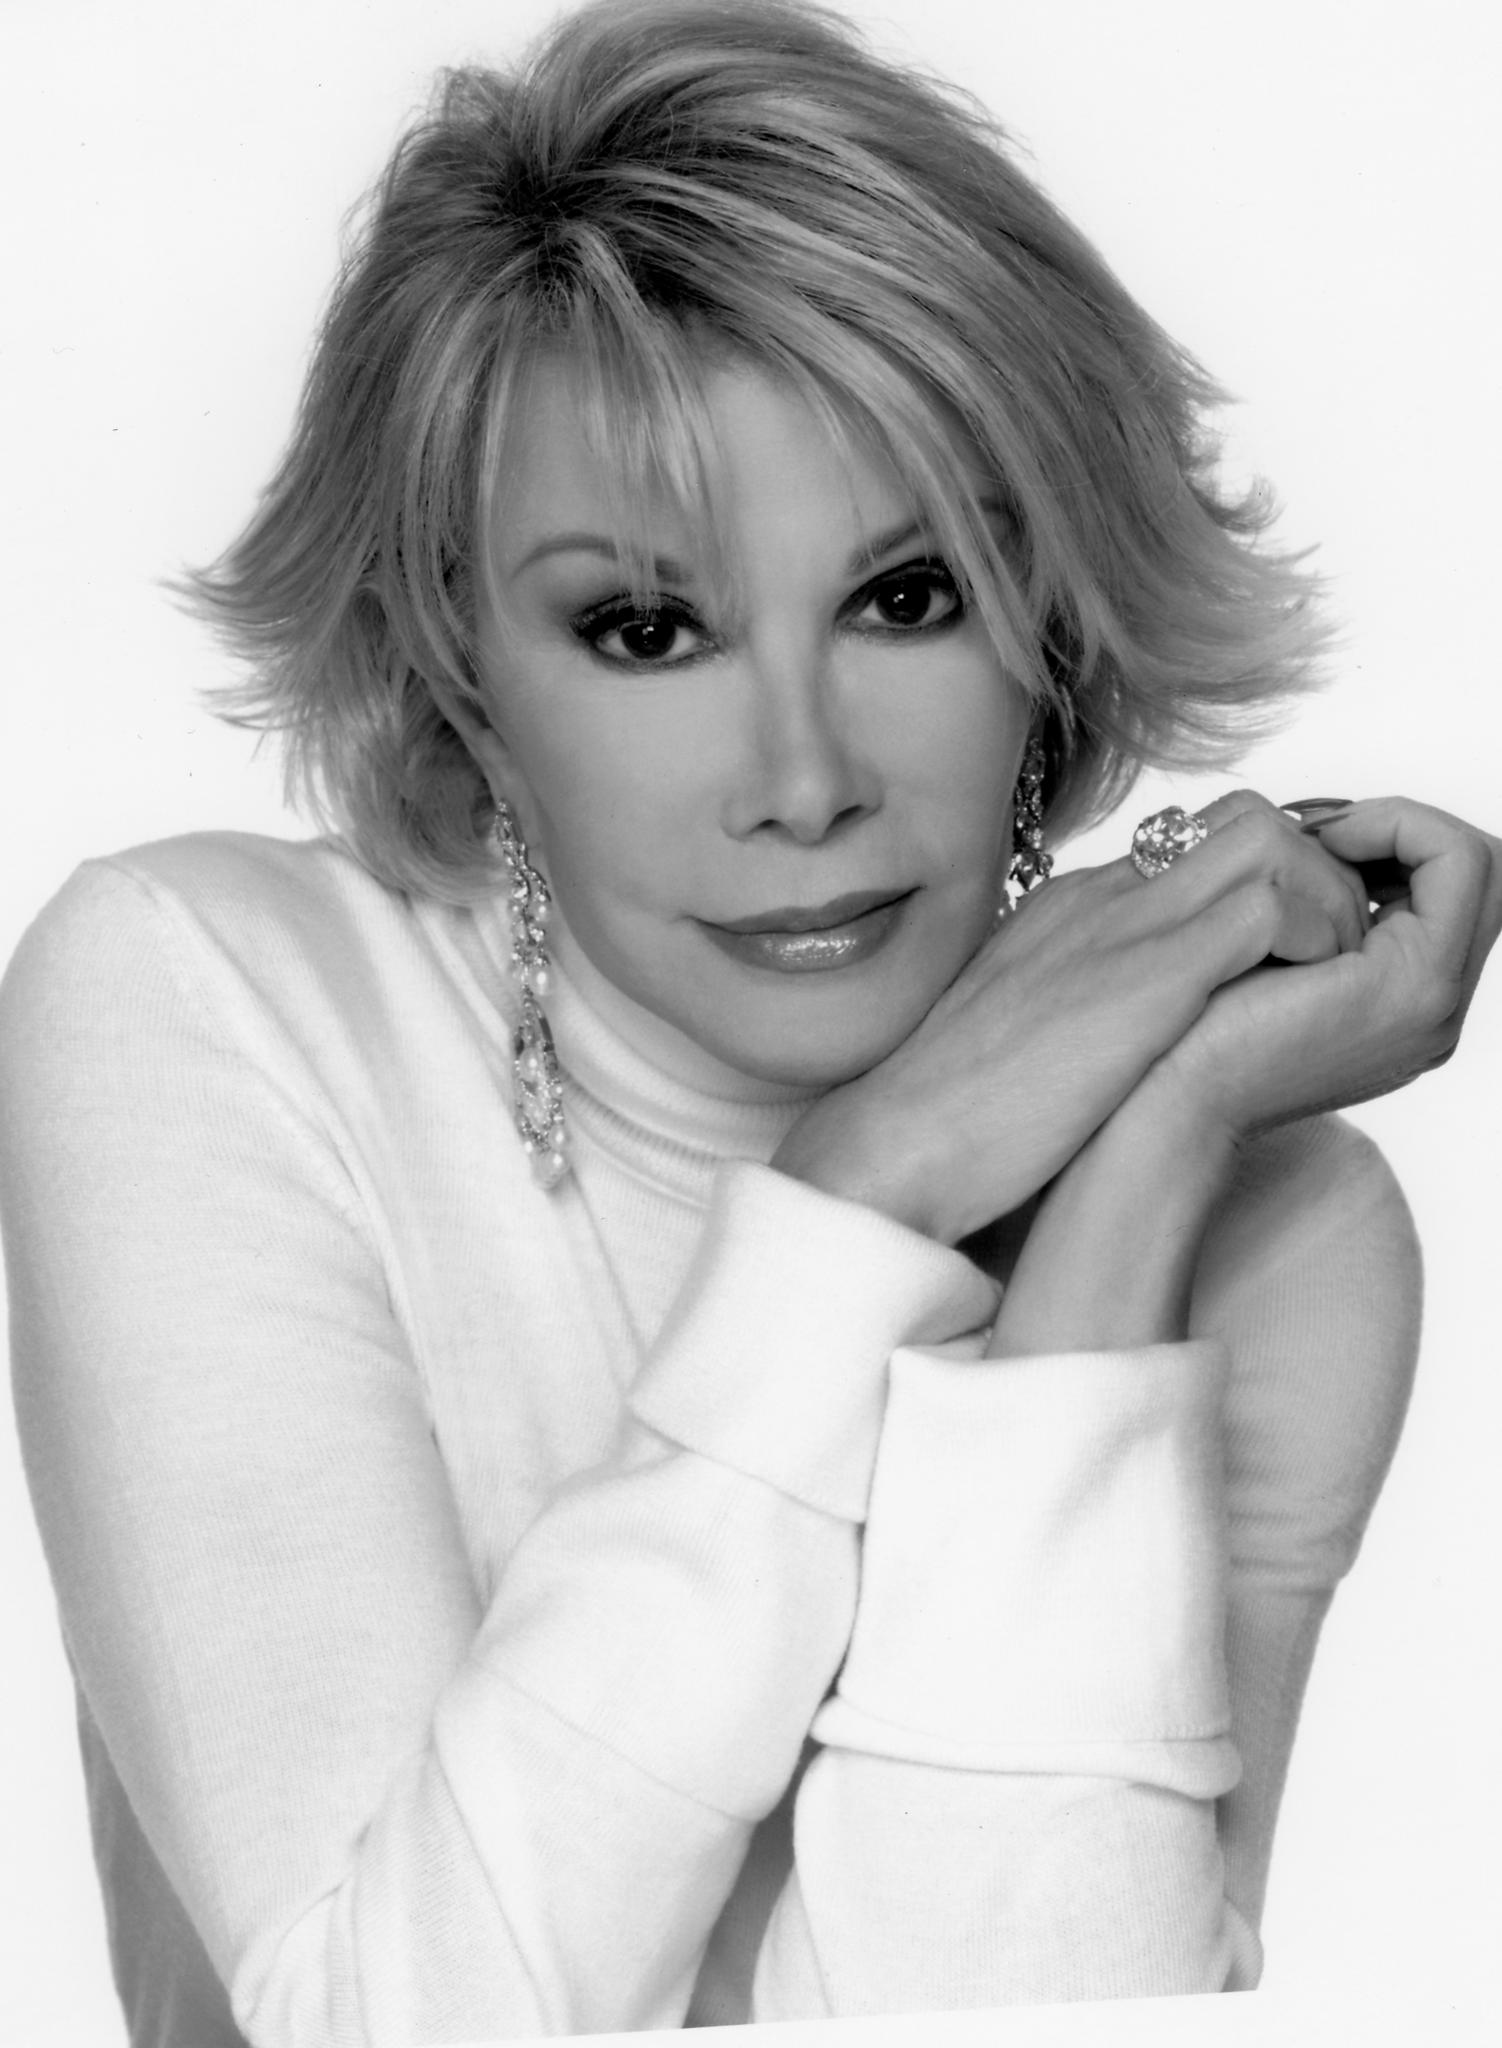 joan-rivers-dead-at-81-rest-in-peace